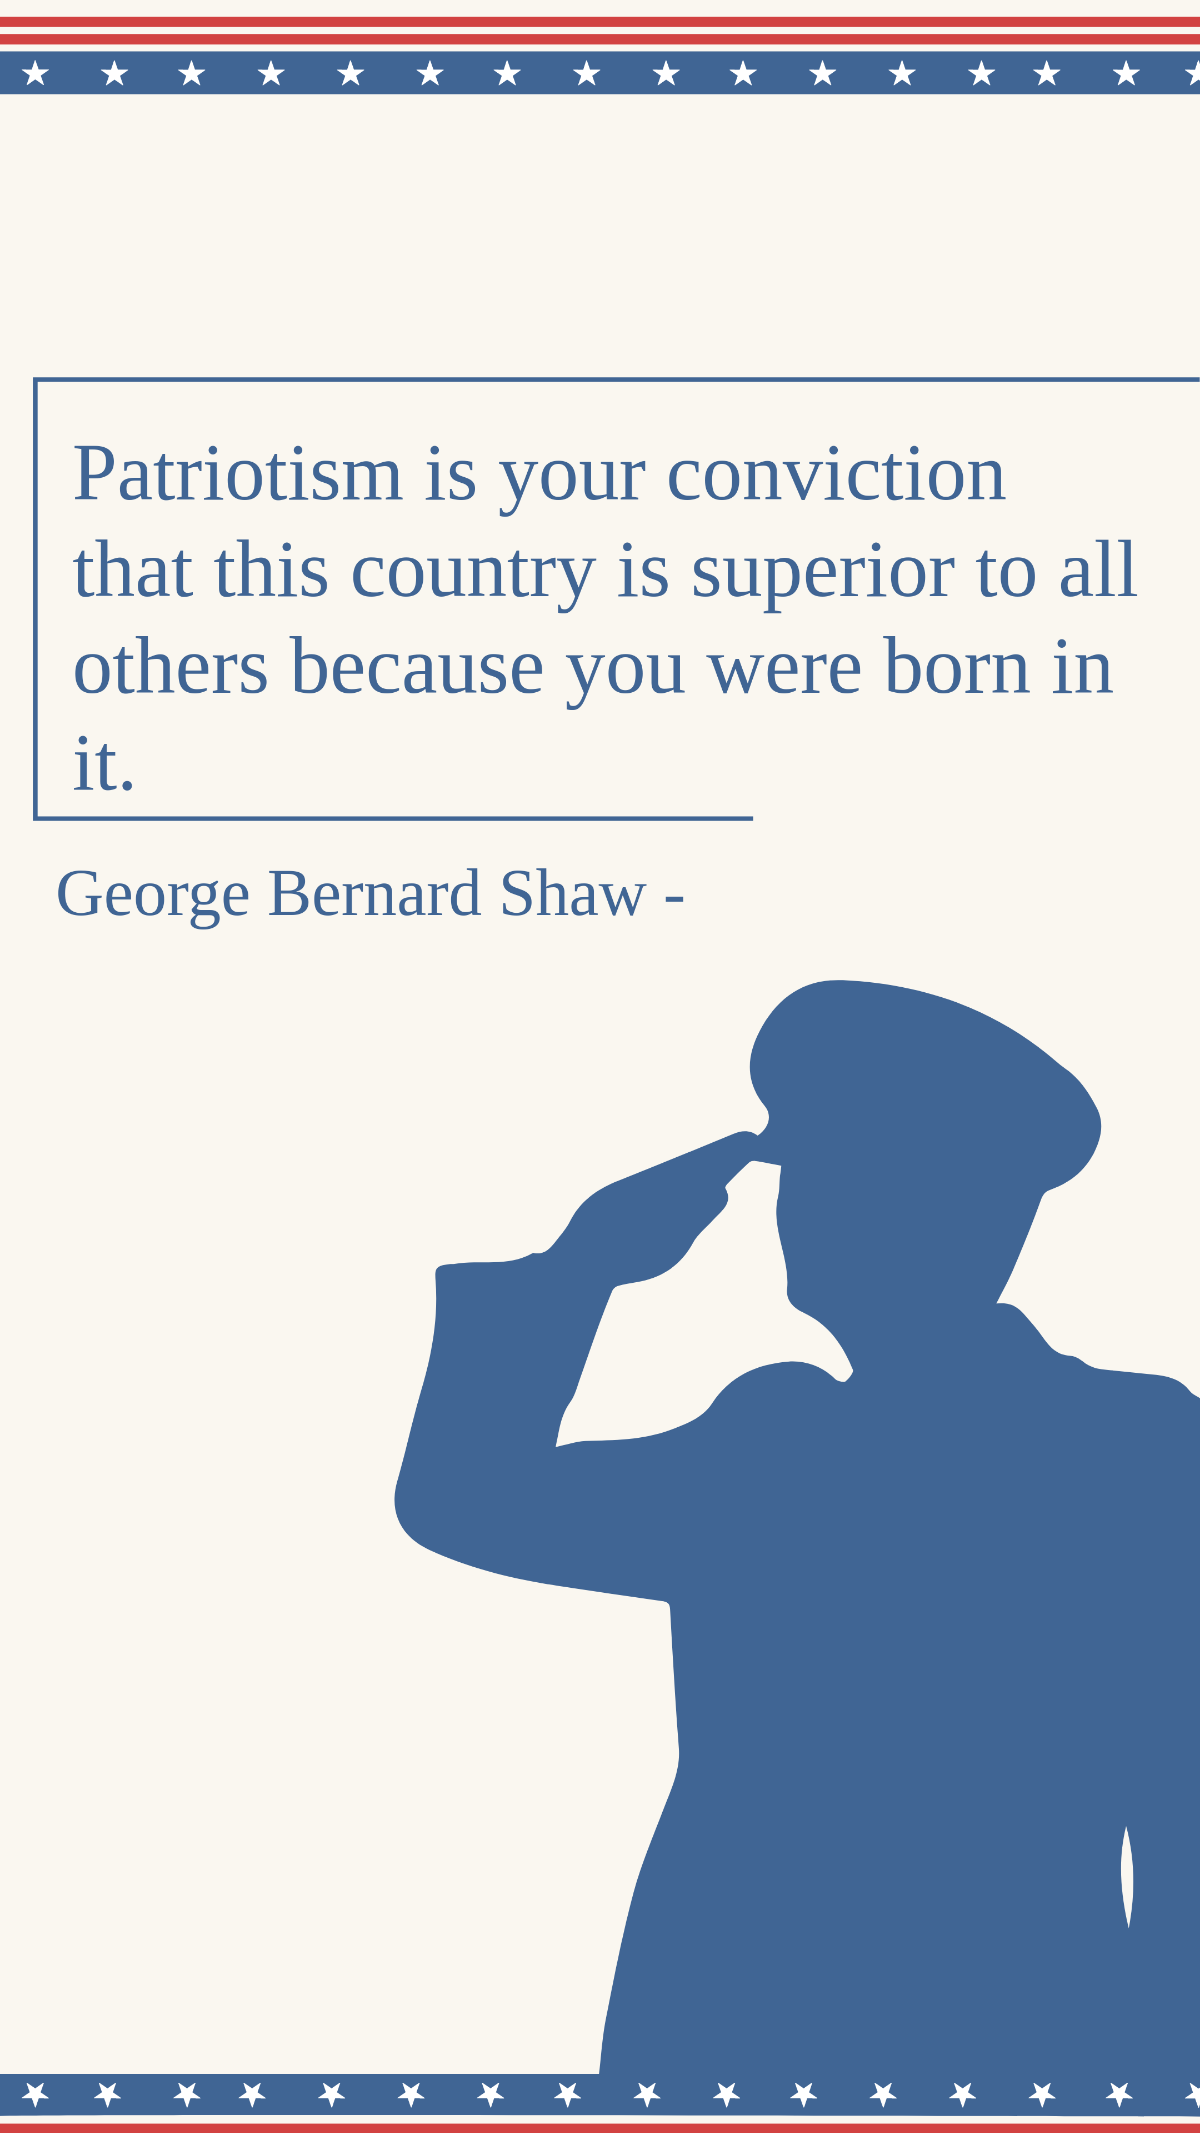 George Bernard Shaw - Patriotism is your conviction that this country is superior to all others because you were born in it. Template